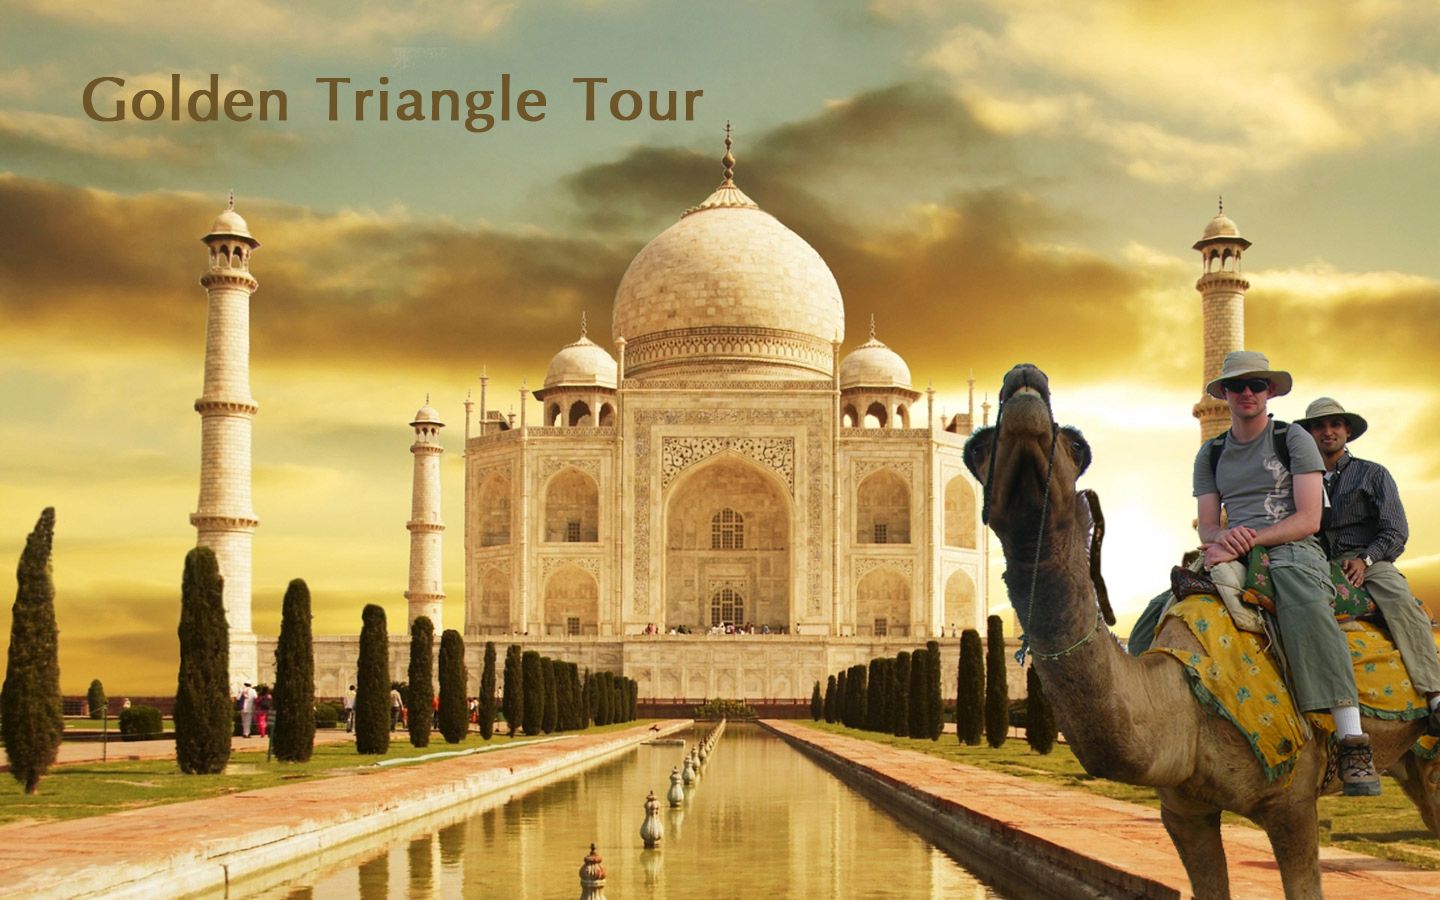 Starling Holiday packages in India, golden triangle trip and tailor made itineraries to the golden triangle tou. Cool places to visit, India tour, Taj mahal india